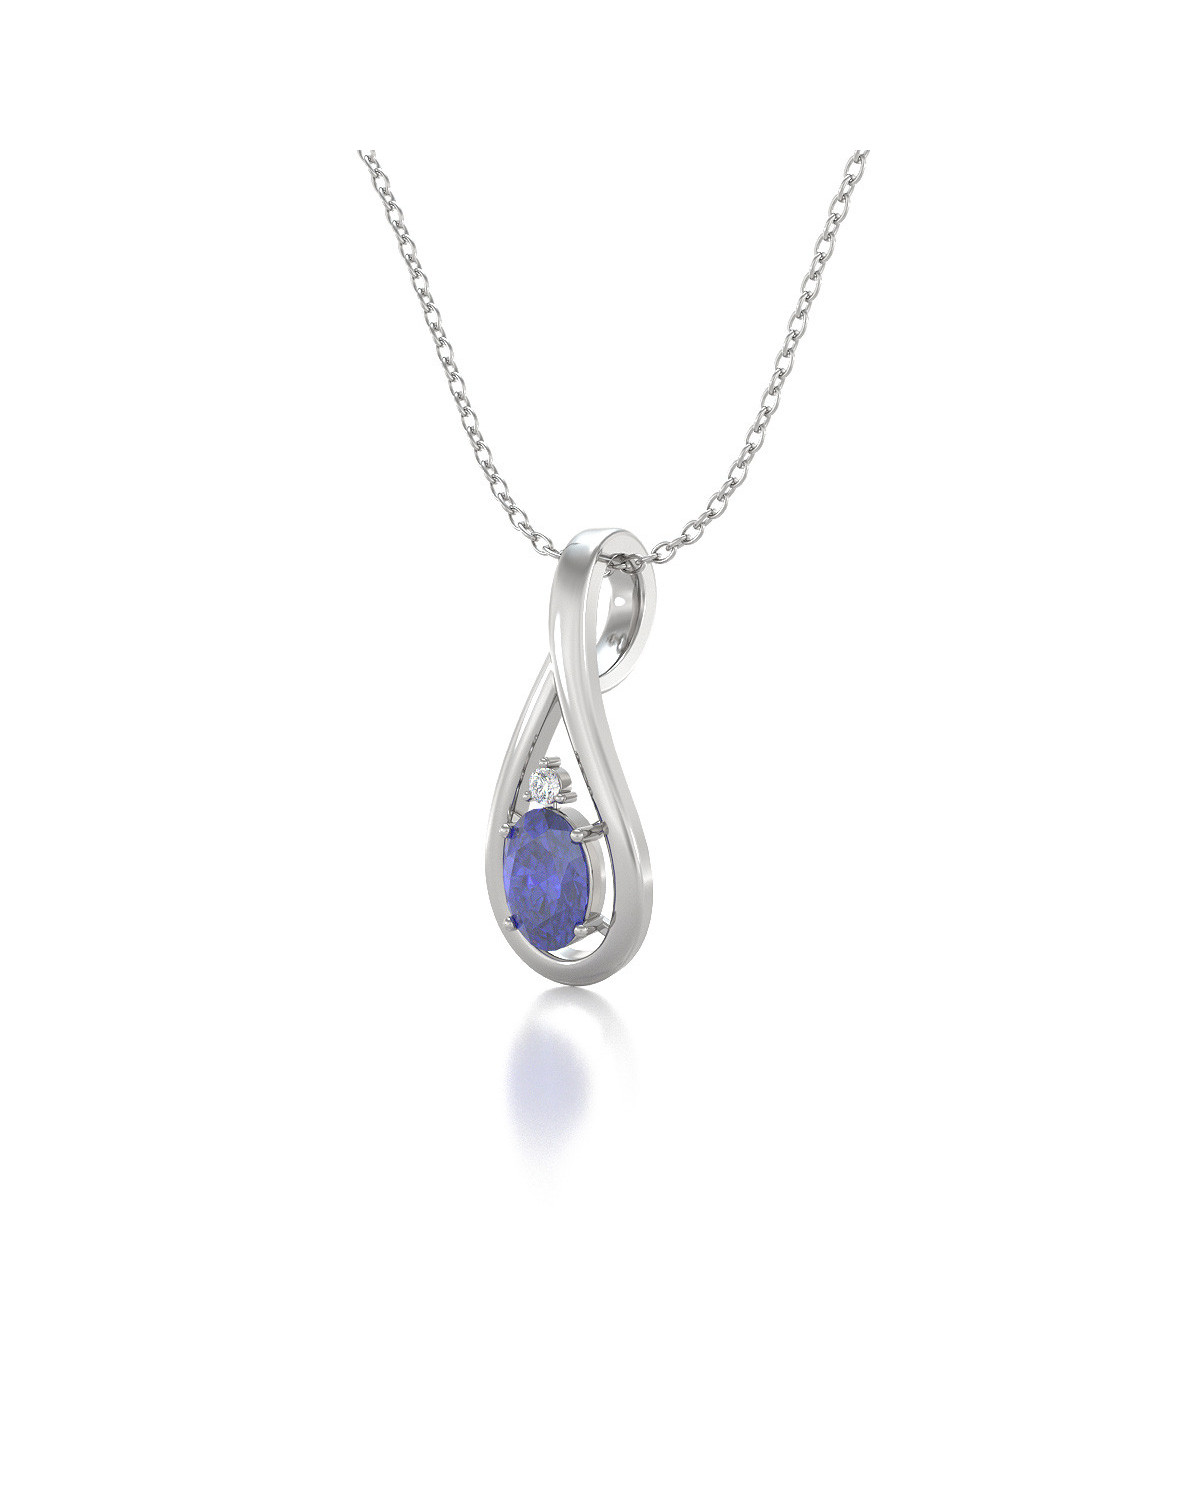 14K Yellow Gold Natural Tanzanite and Diamond Necklace 18 inch chain